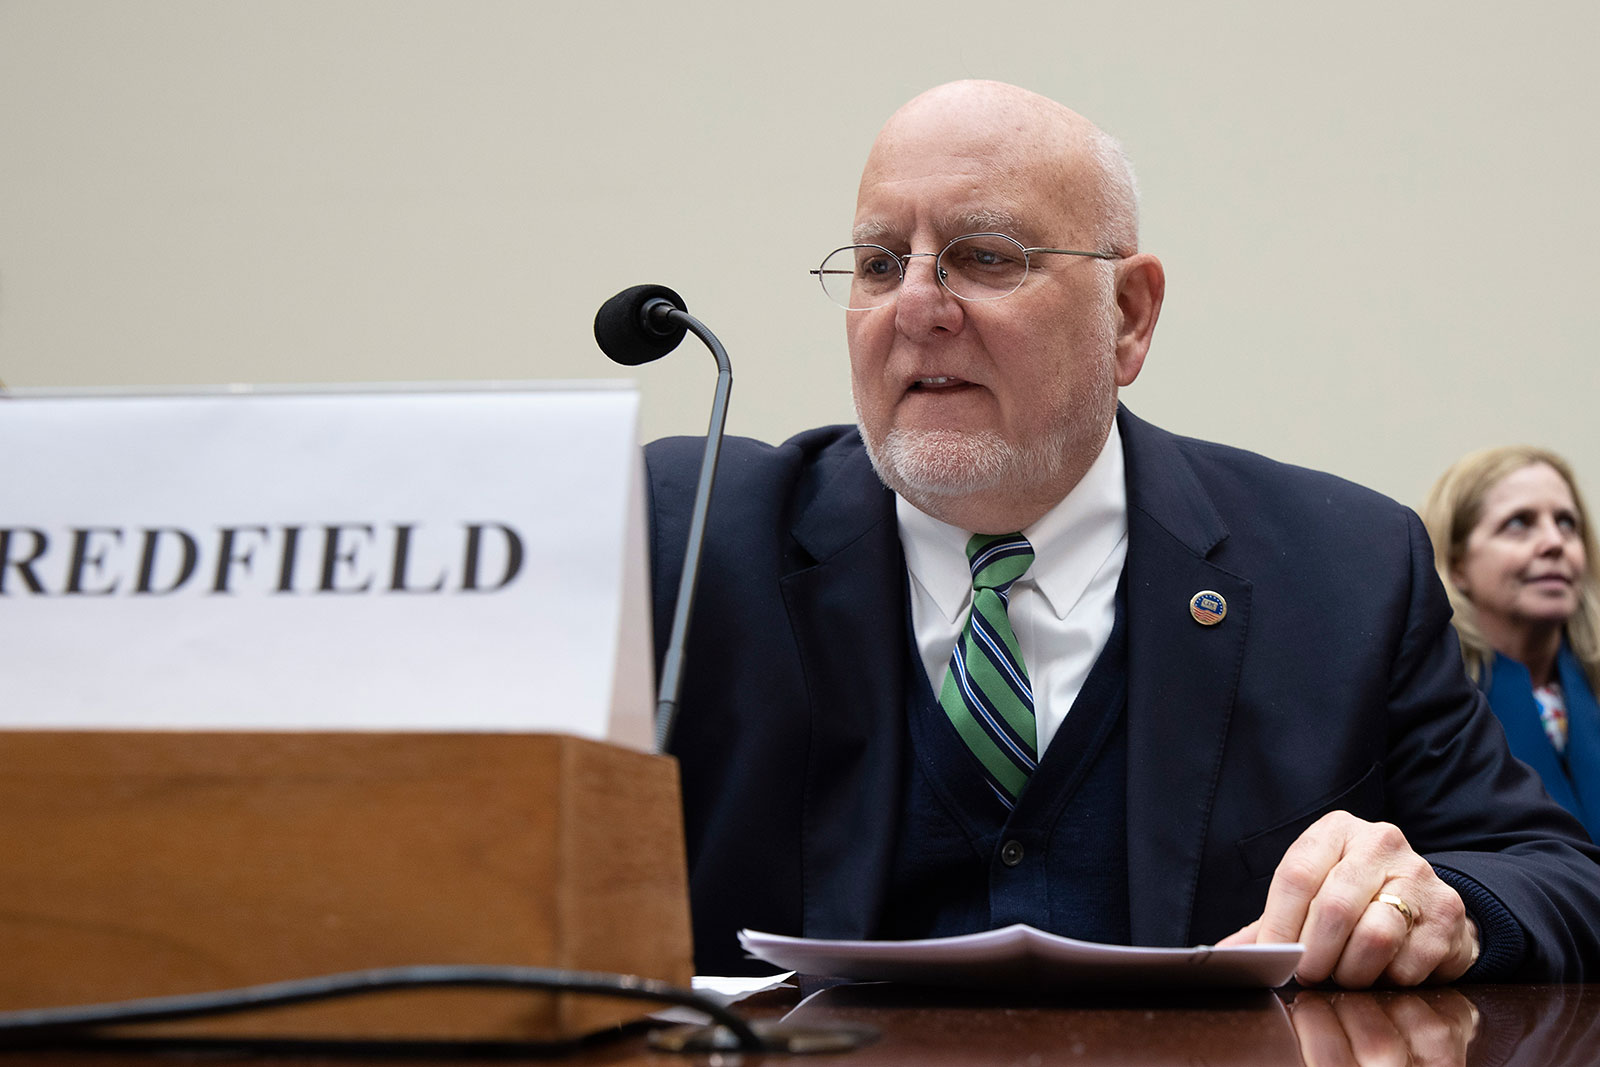 Robert Redfield, the director of the US Centers for Disease Control and Prevention, testifies at a House Foreign Affairs Committee on Capitol Hill on Thursday.